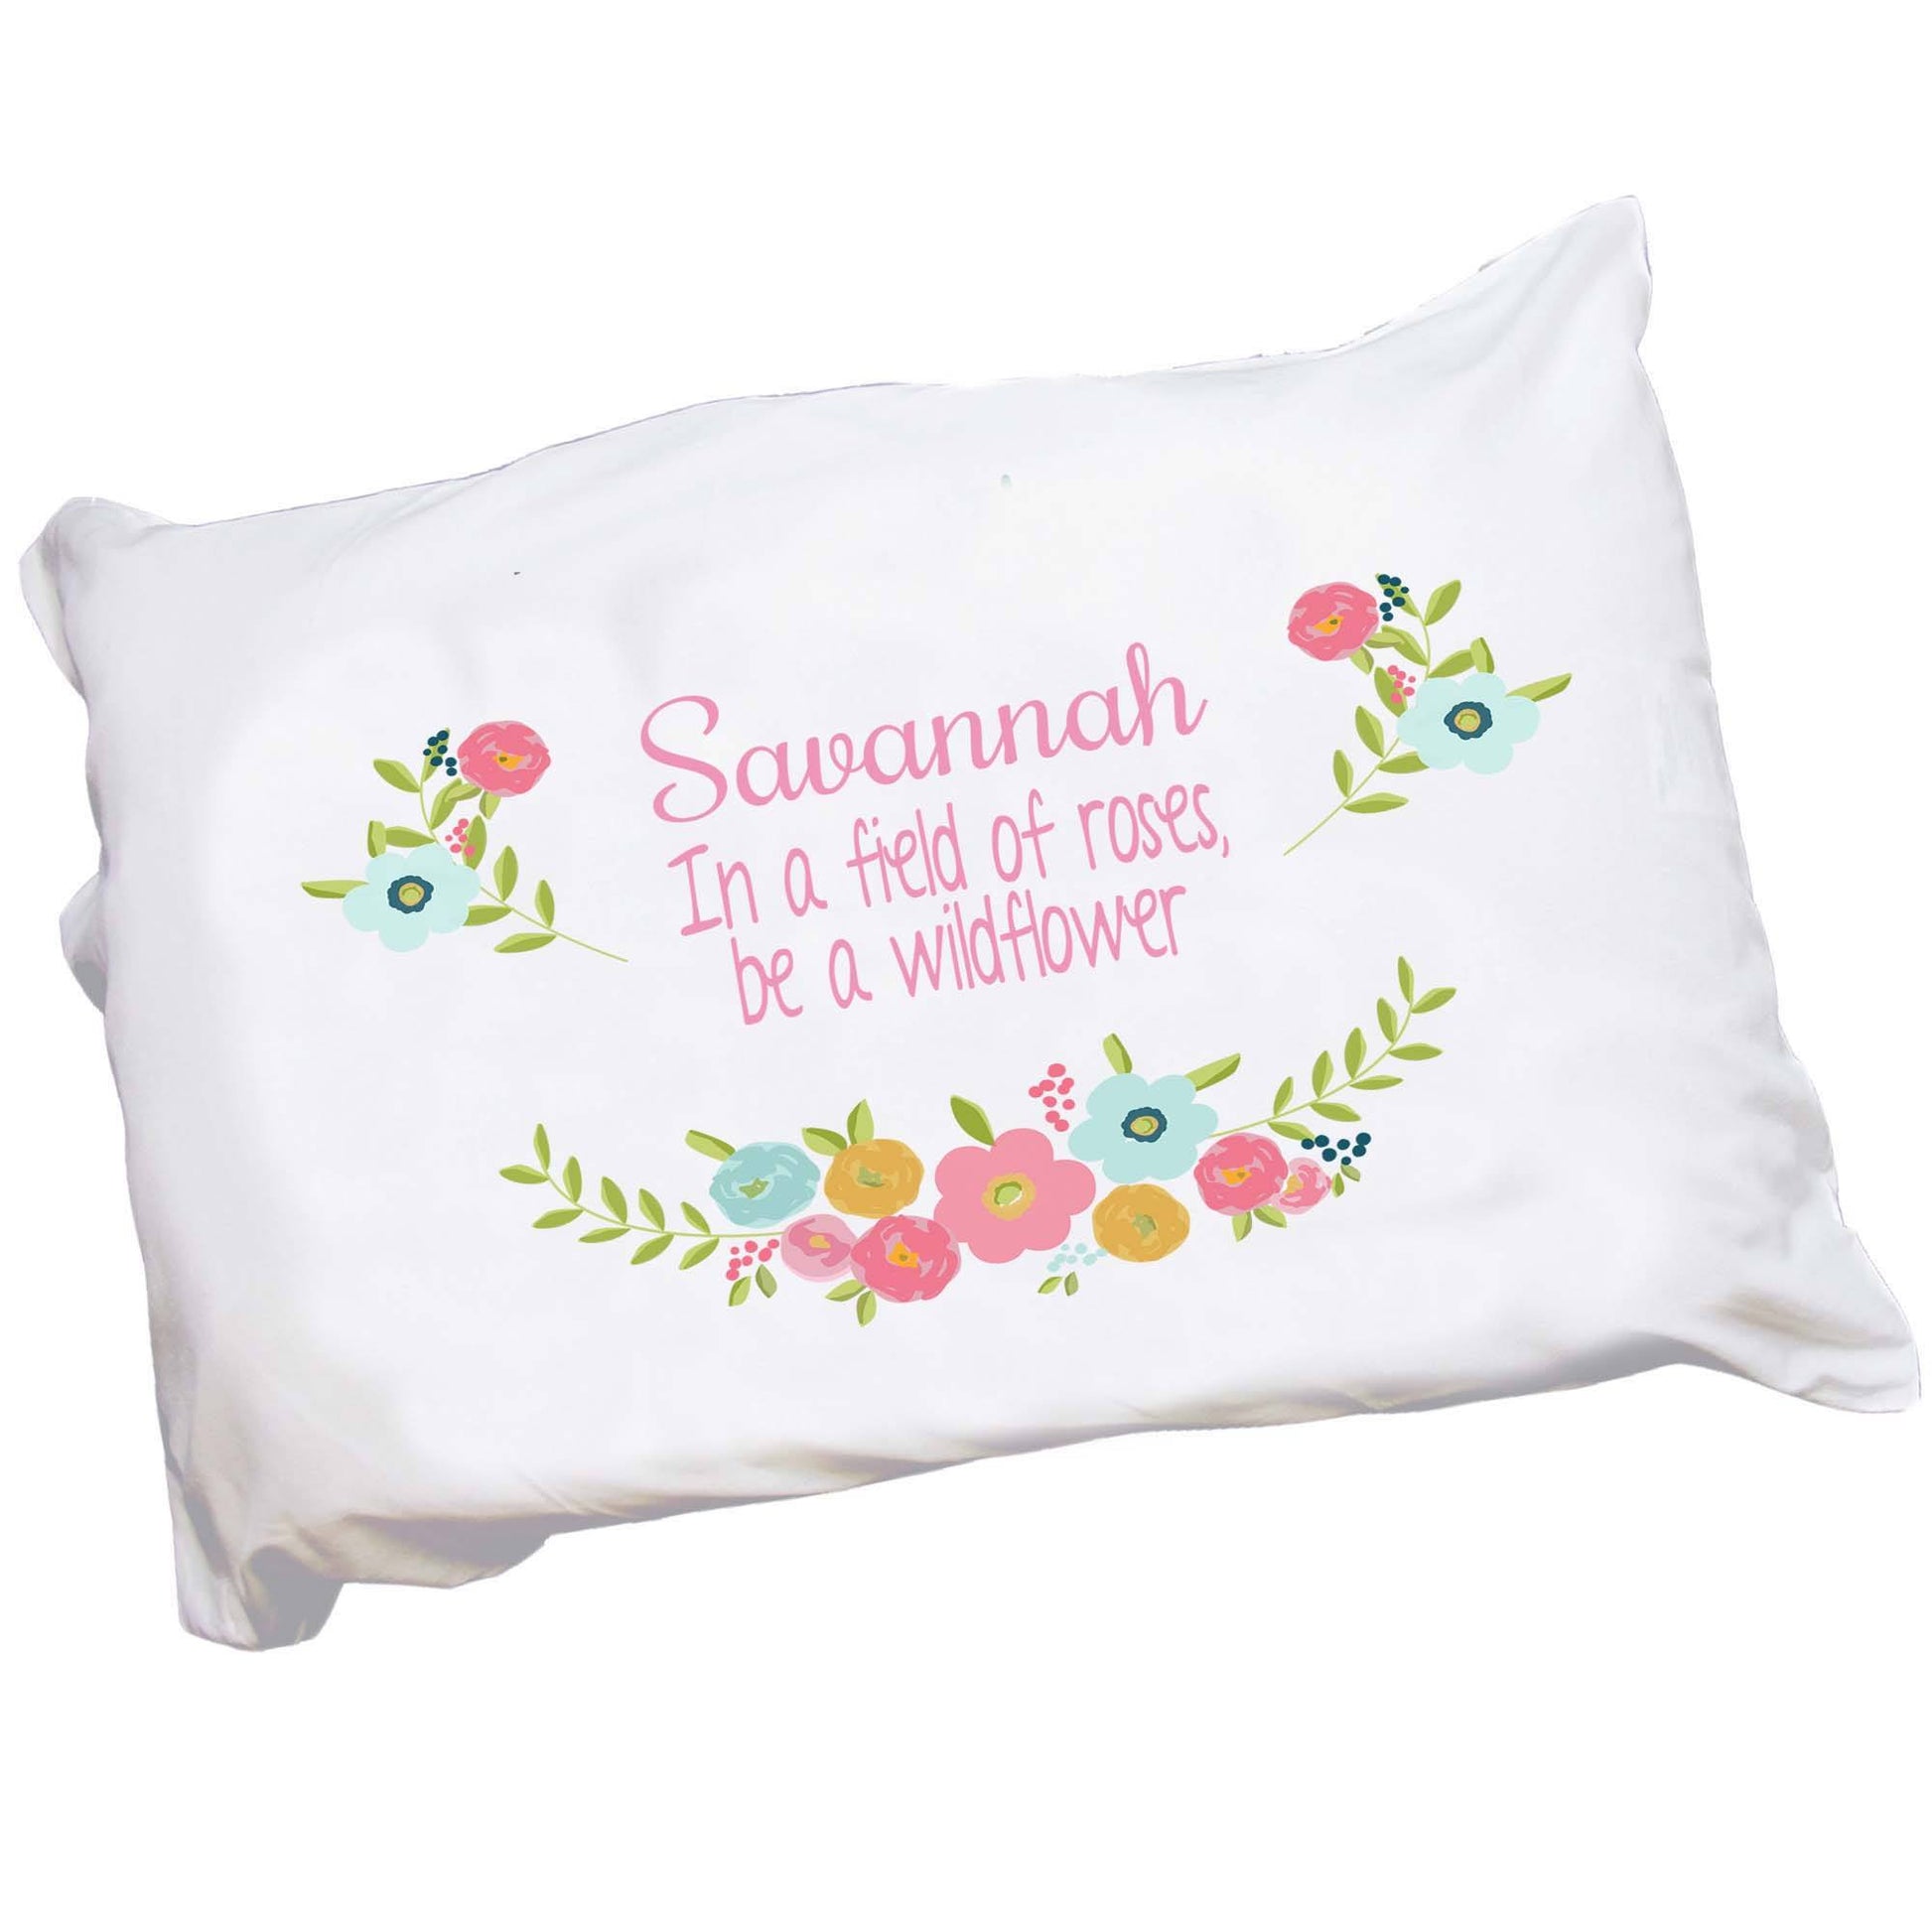 Personalized Childrens Pillowcase with Spring Floral design